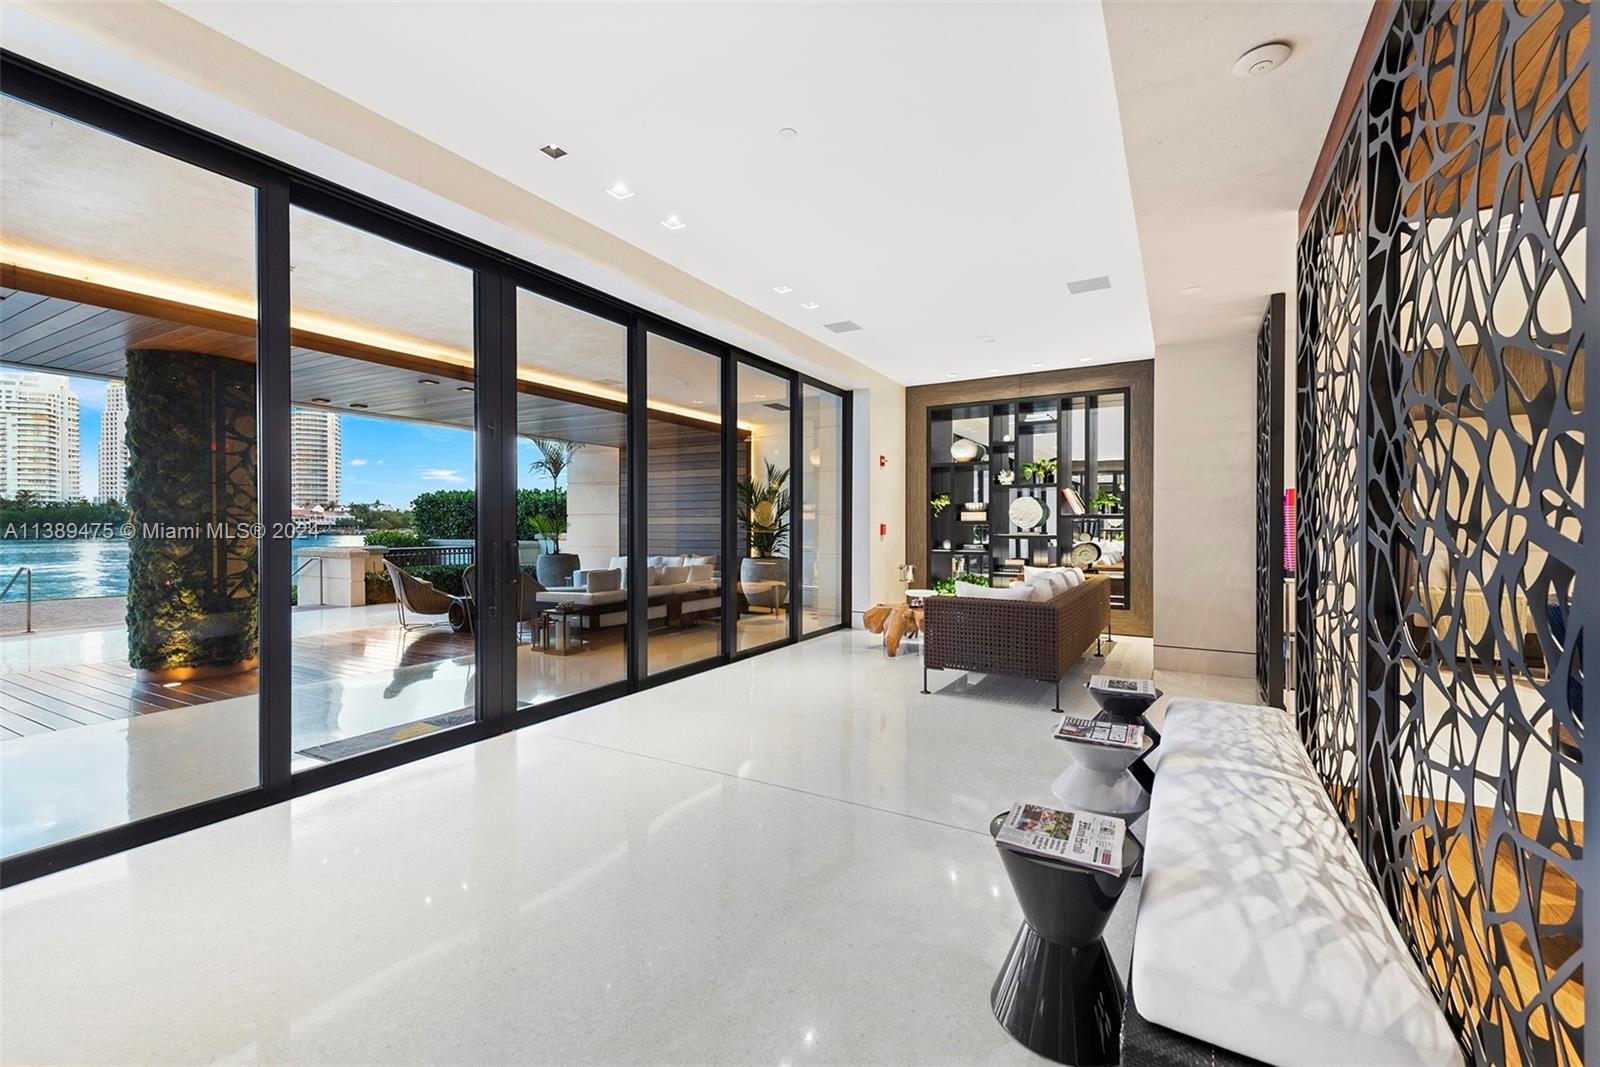 7085 Fisher Island Dr, Miami Beach, Florida, 33109, United States, 5 Bedrooms Bedrooms, ,6 BathroomsBathrooms,Residential,For Sale,7085 Fisher Island Dr,1271501